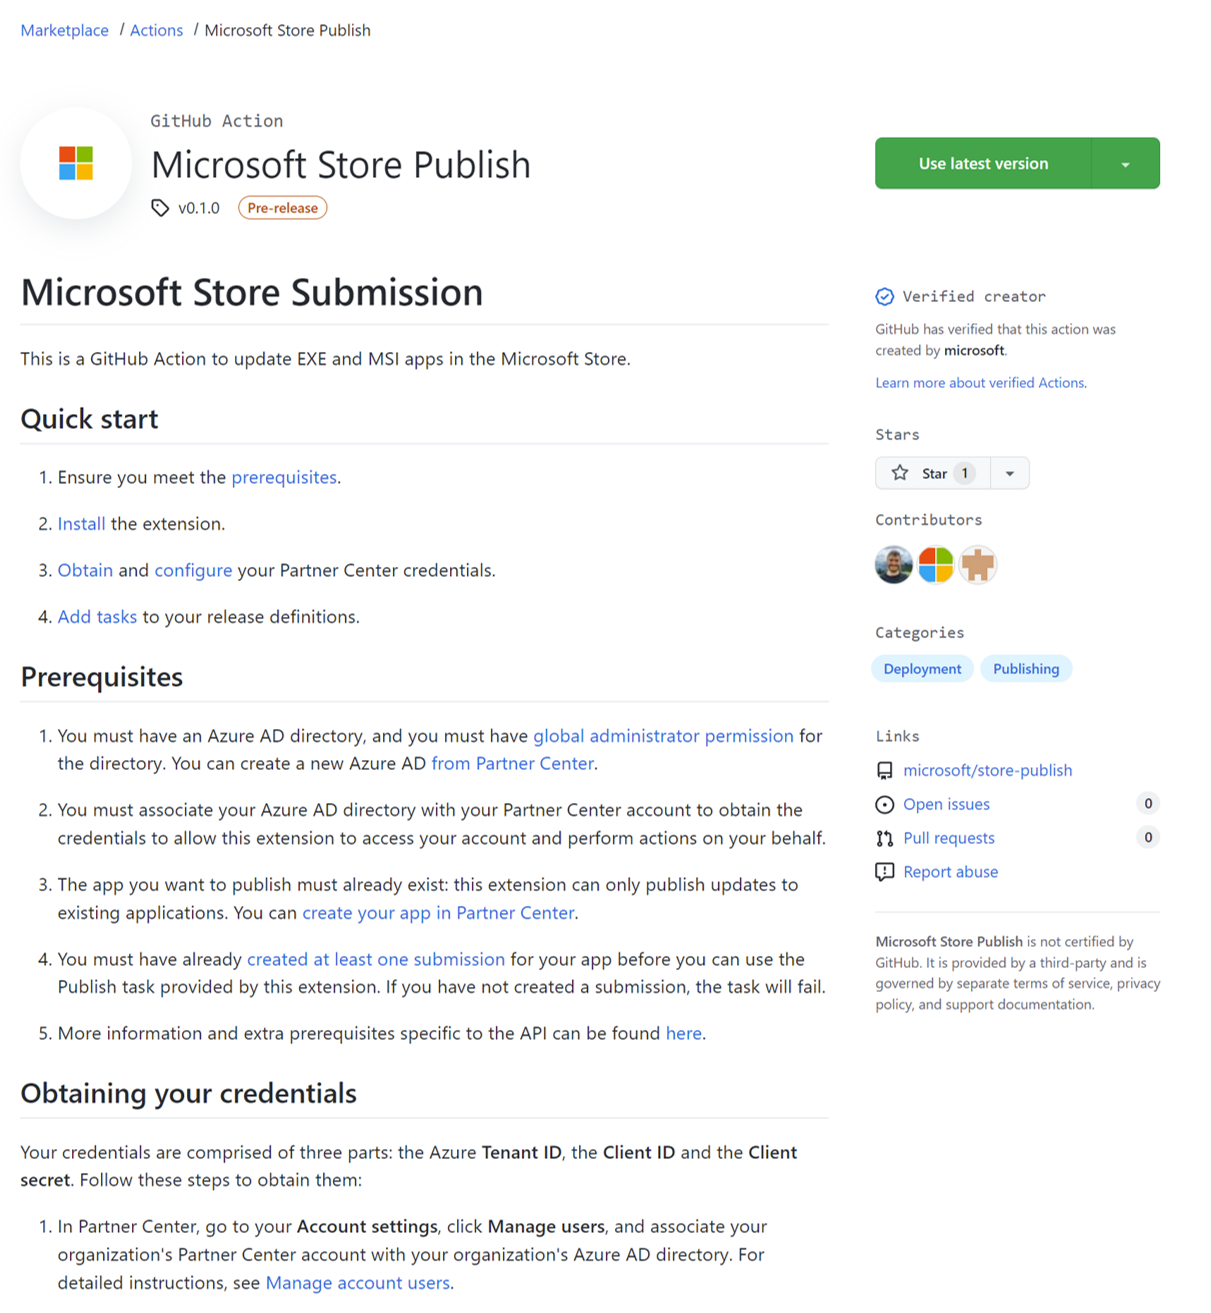 How Do I Develop and app and get it into the Microsoft Store Microsoft-Store-Publish-GitHub-action53.png